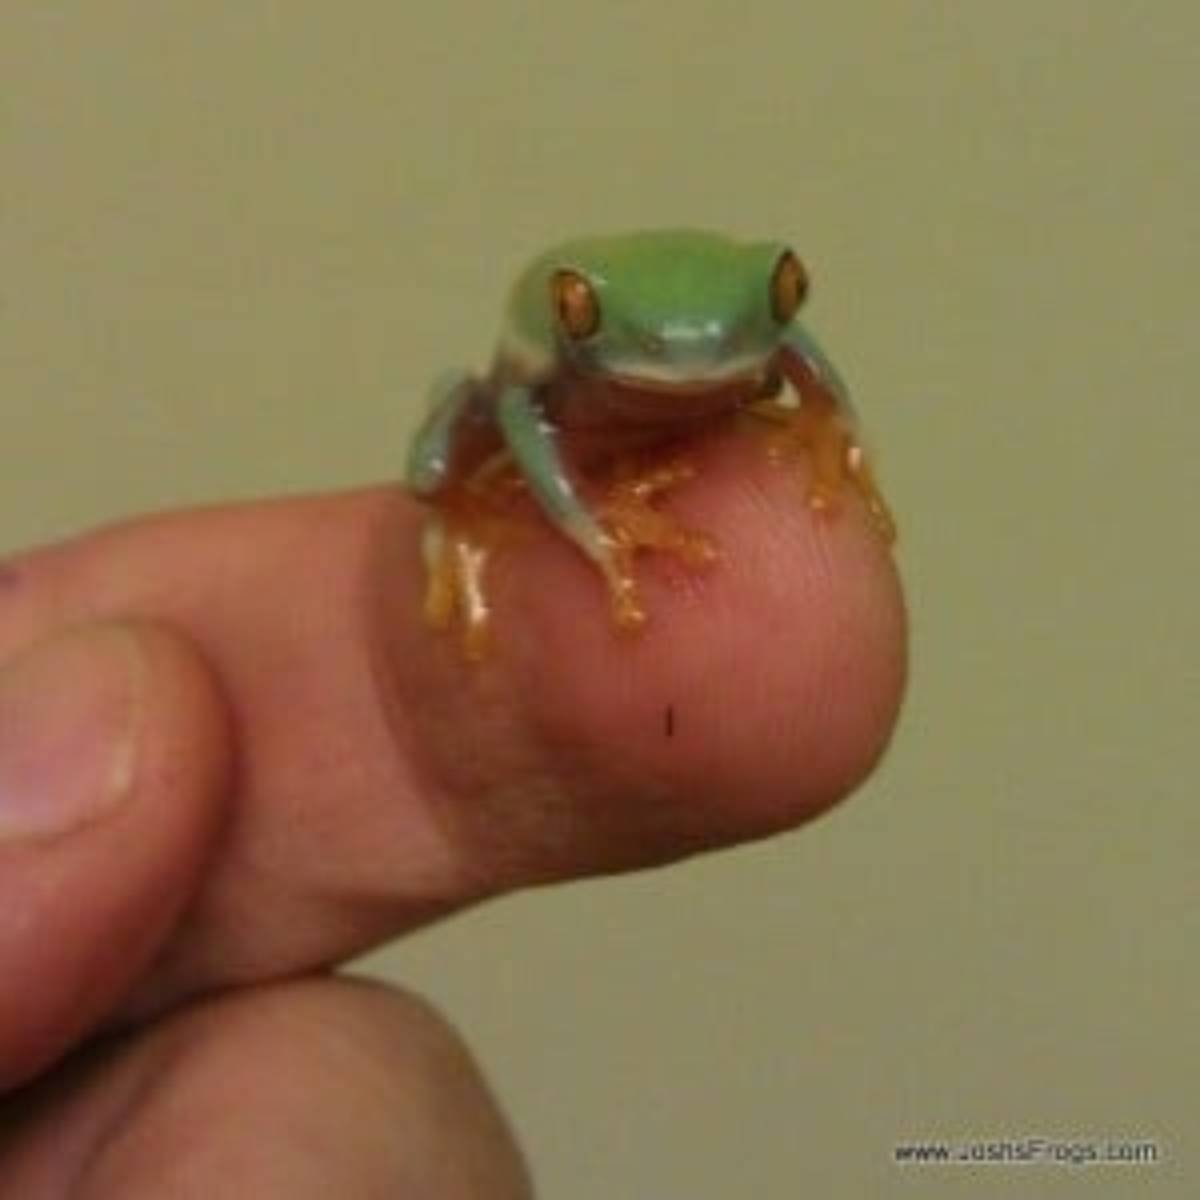 Baby Red Eye Tree Frog, just a few hours out of the water.